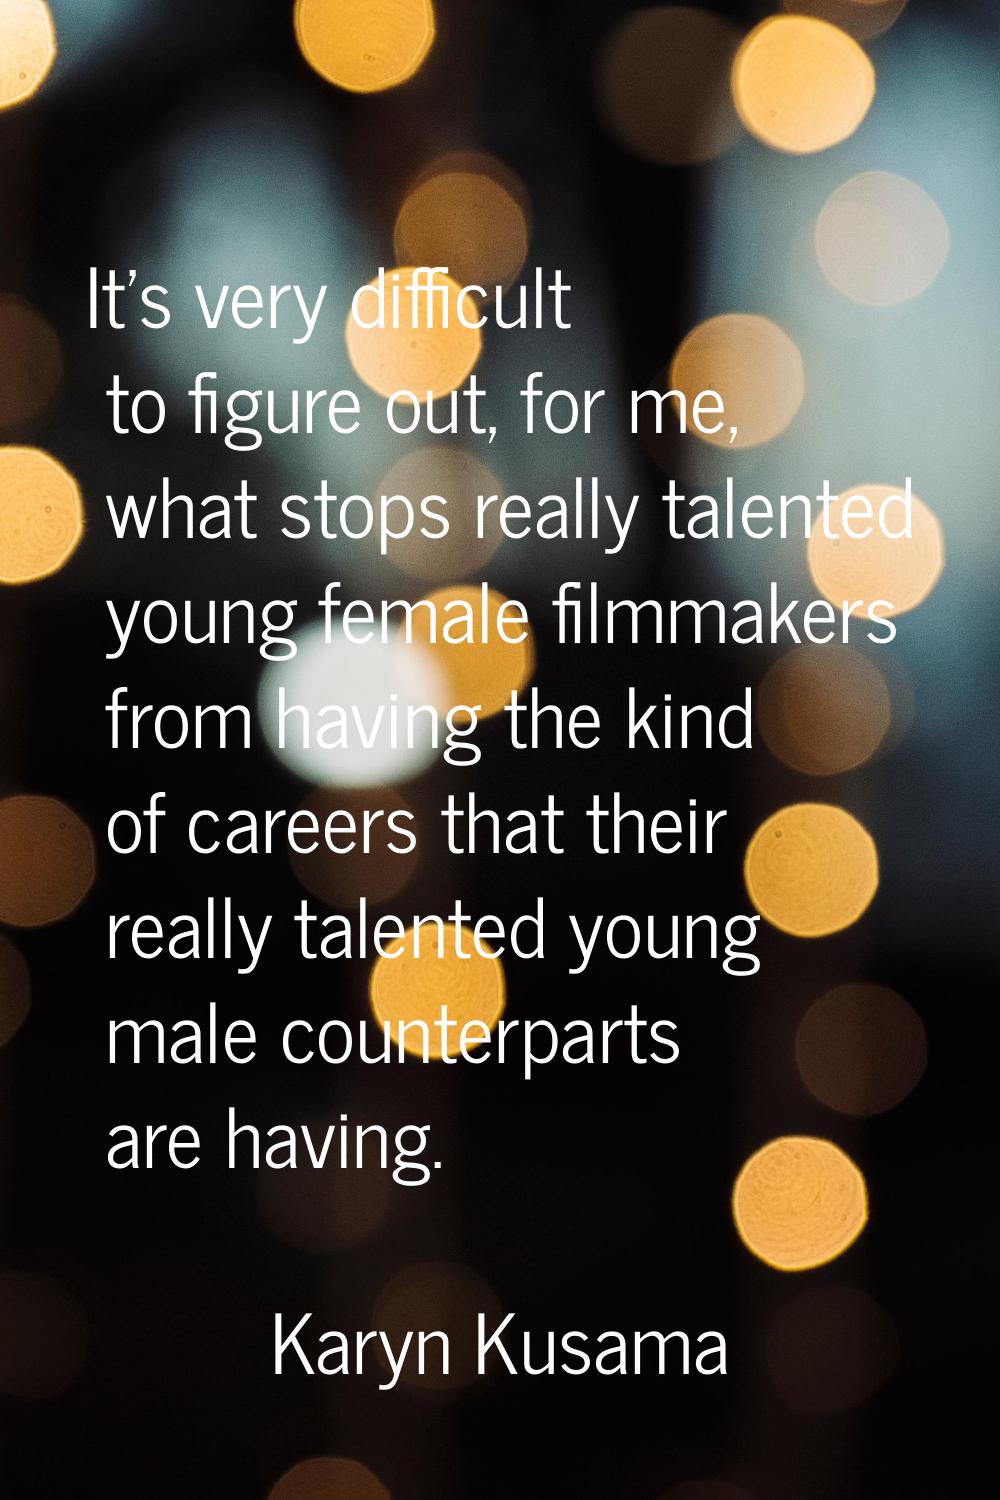 It's very difficult to figure out, for me, what stops really talented young female filmmakers from 